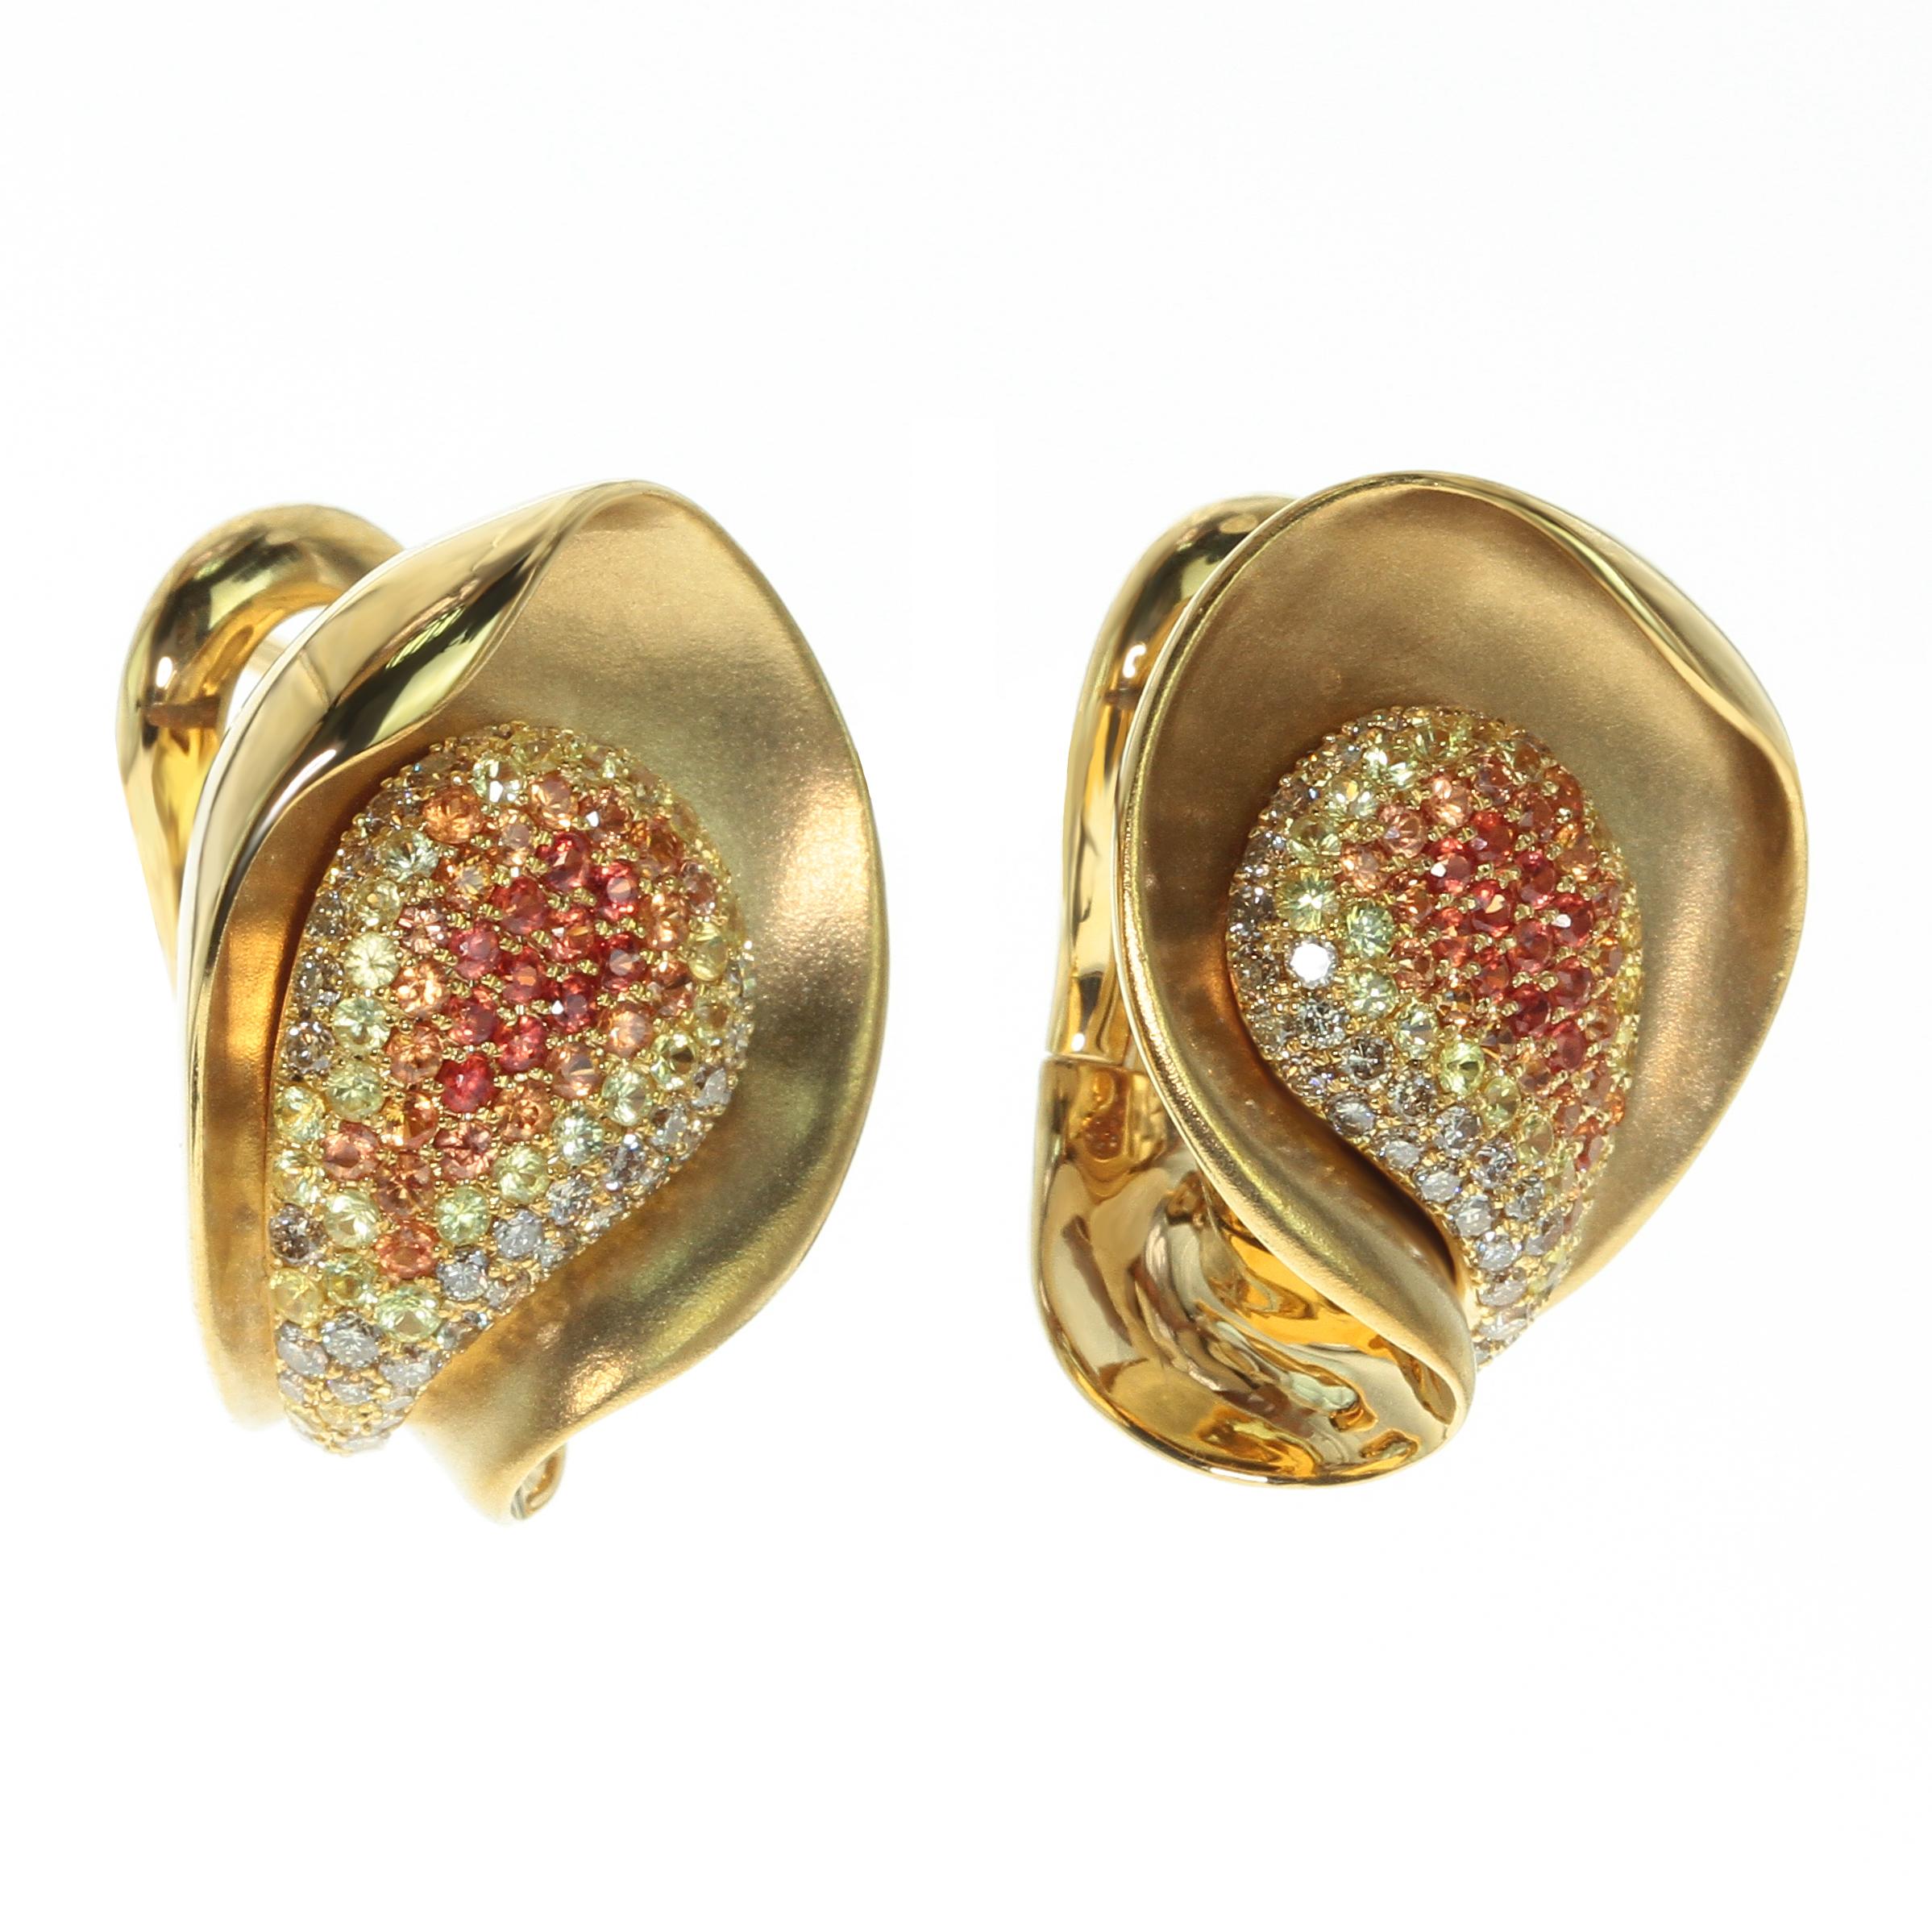 Diamond Multicolor Sapphire 18 Karat Yellow Gold Earring

Have you ever see how the Sunlight plays on Silk? Our designers catch this moment in this Beautiful Earrings. The graduation of Orange, Yellow Sapphires to the Champagne Diamonds gives full